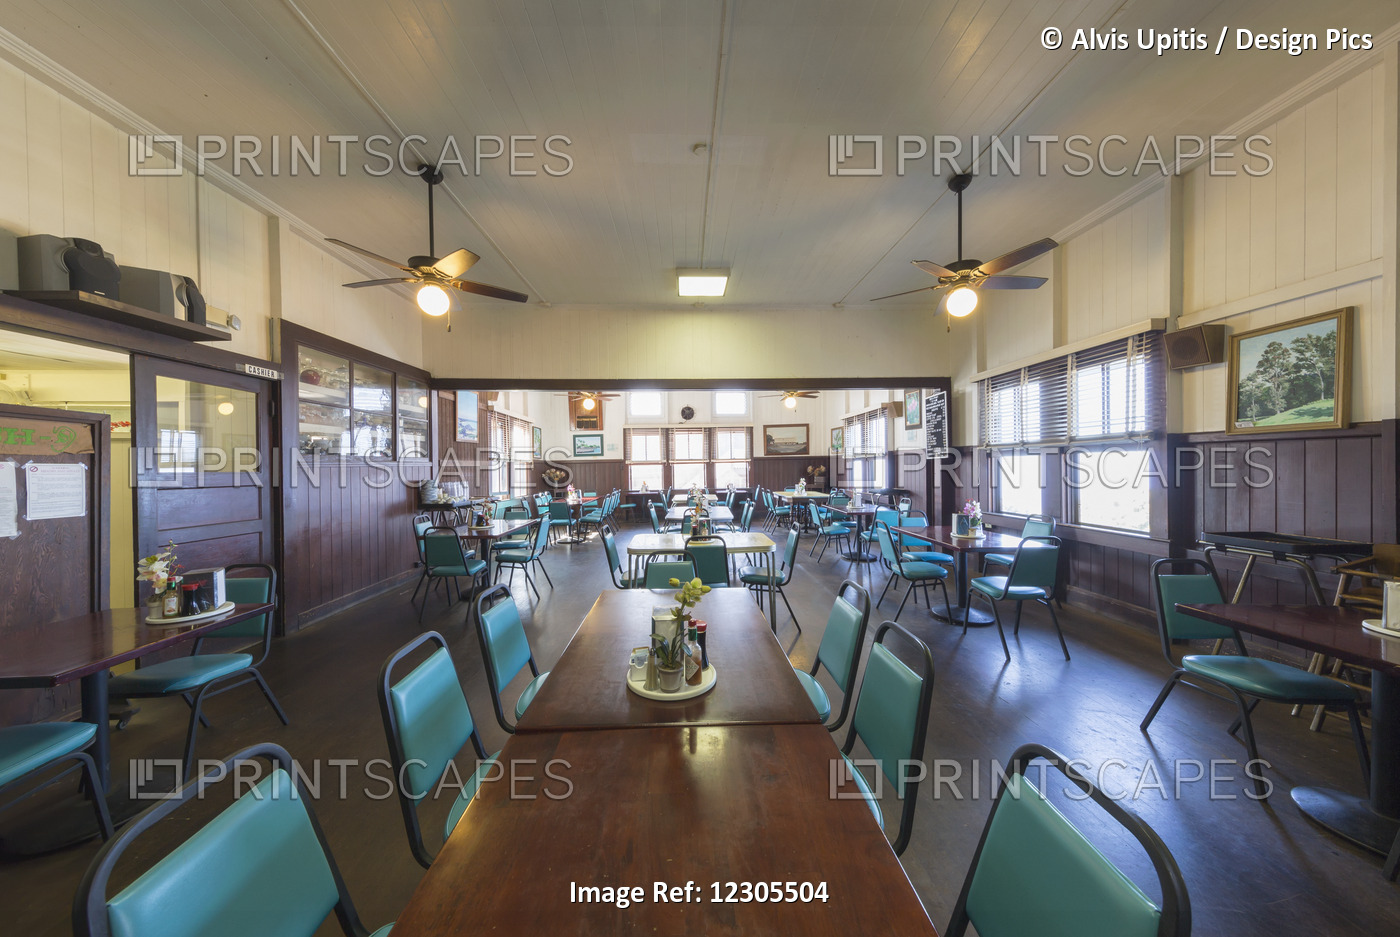 Dining Room Of 100 Year Old Mangao Hotel, Oldest In Hawaii; Captain Cook, ...